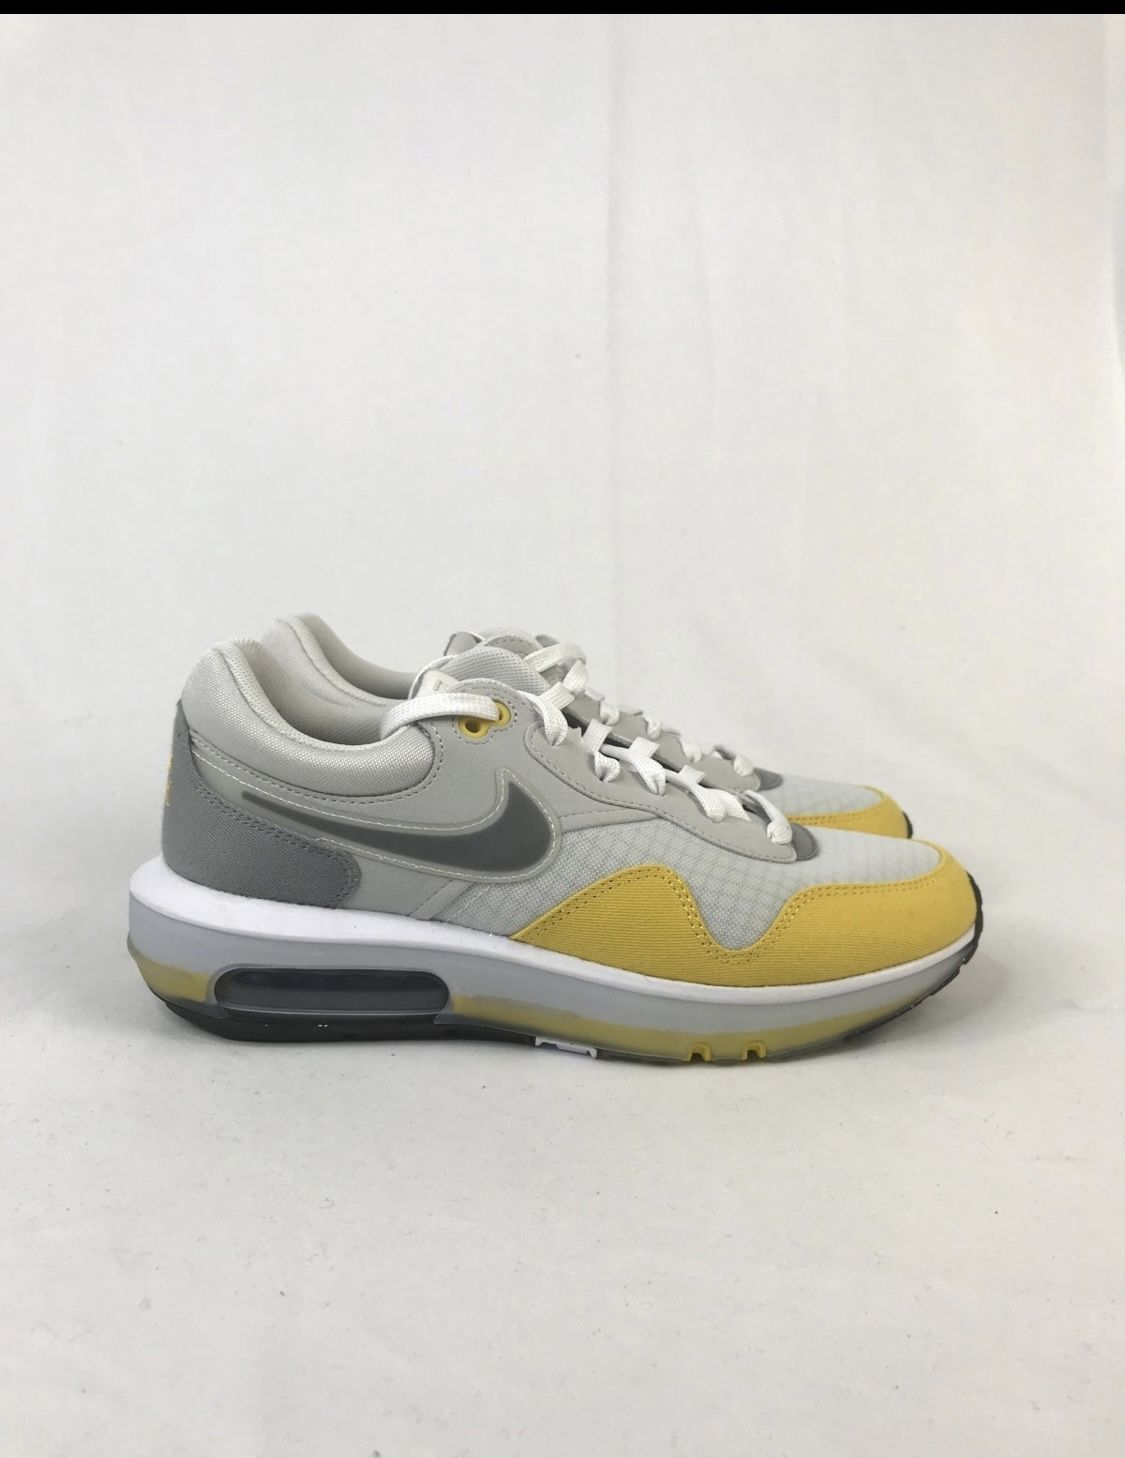 Nike air max Motif Men's Sneaker Grey DD3697-001 1 Sport Casual Shoes Size 7.5 New without box.